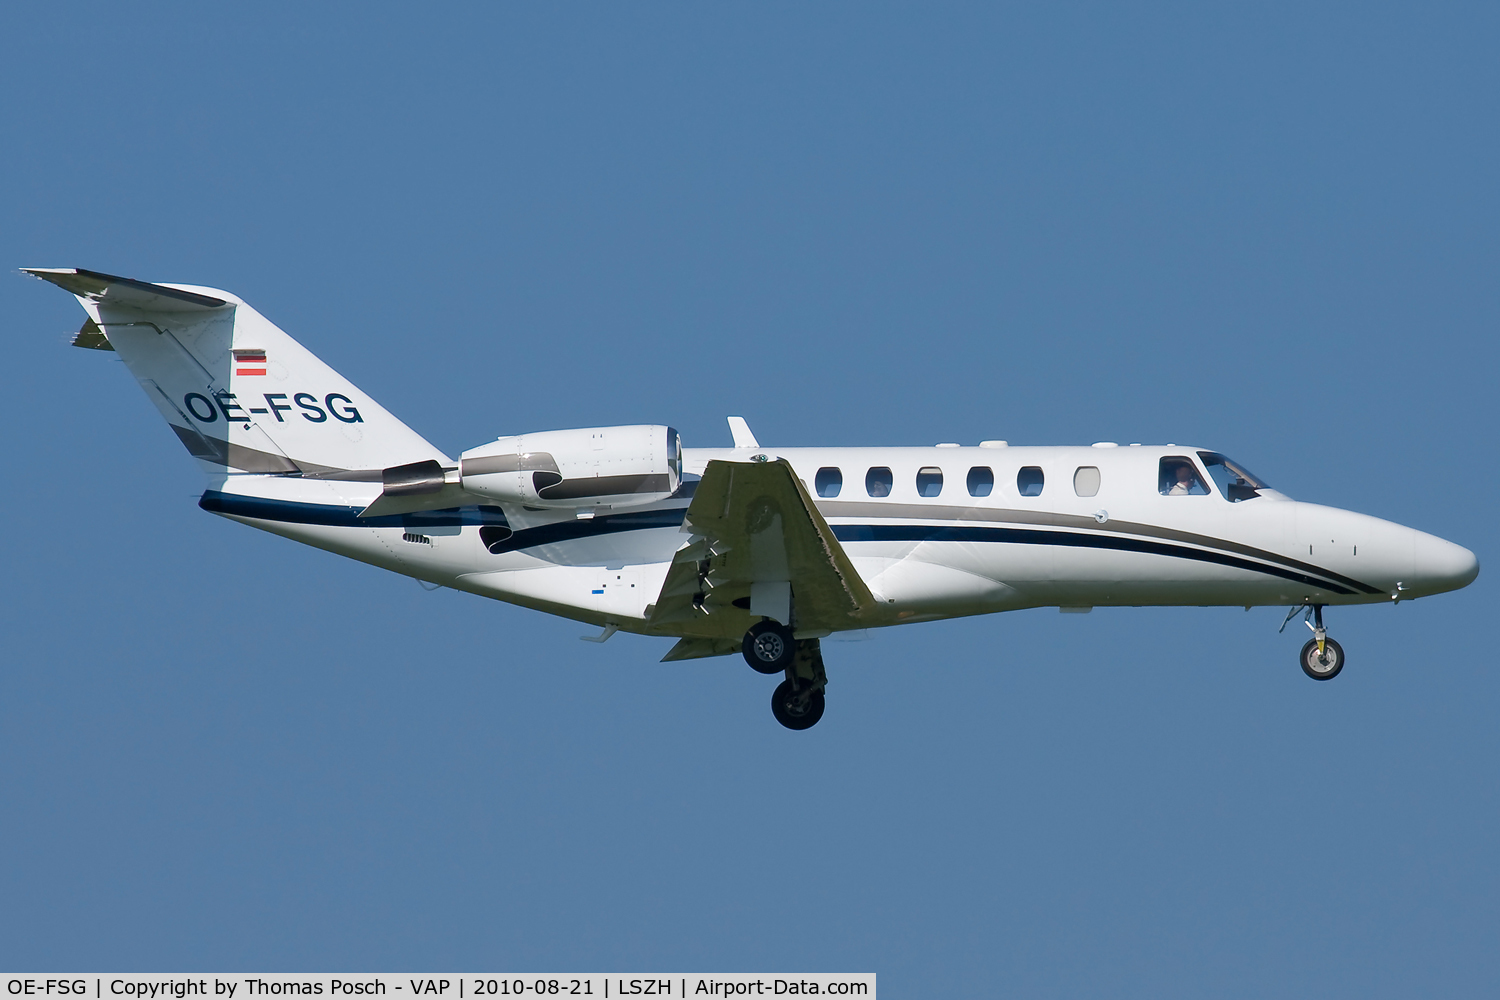 OE-FSG, 2004 Cessna C525A C/N Not found OE-FSG, Tyrolean Jet Services